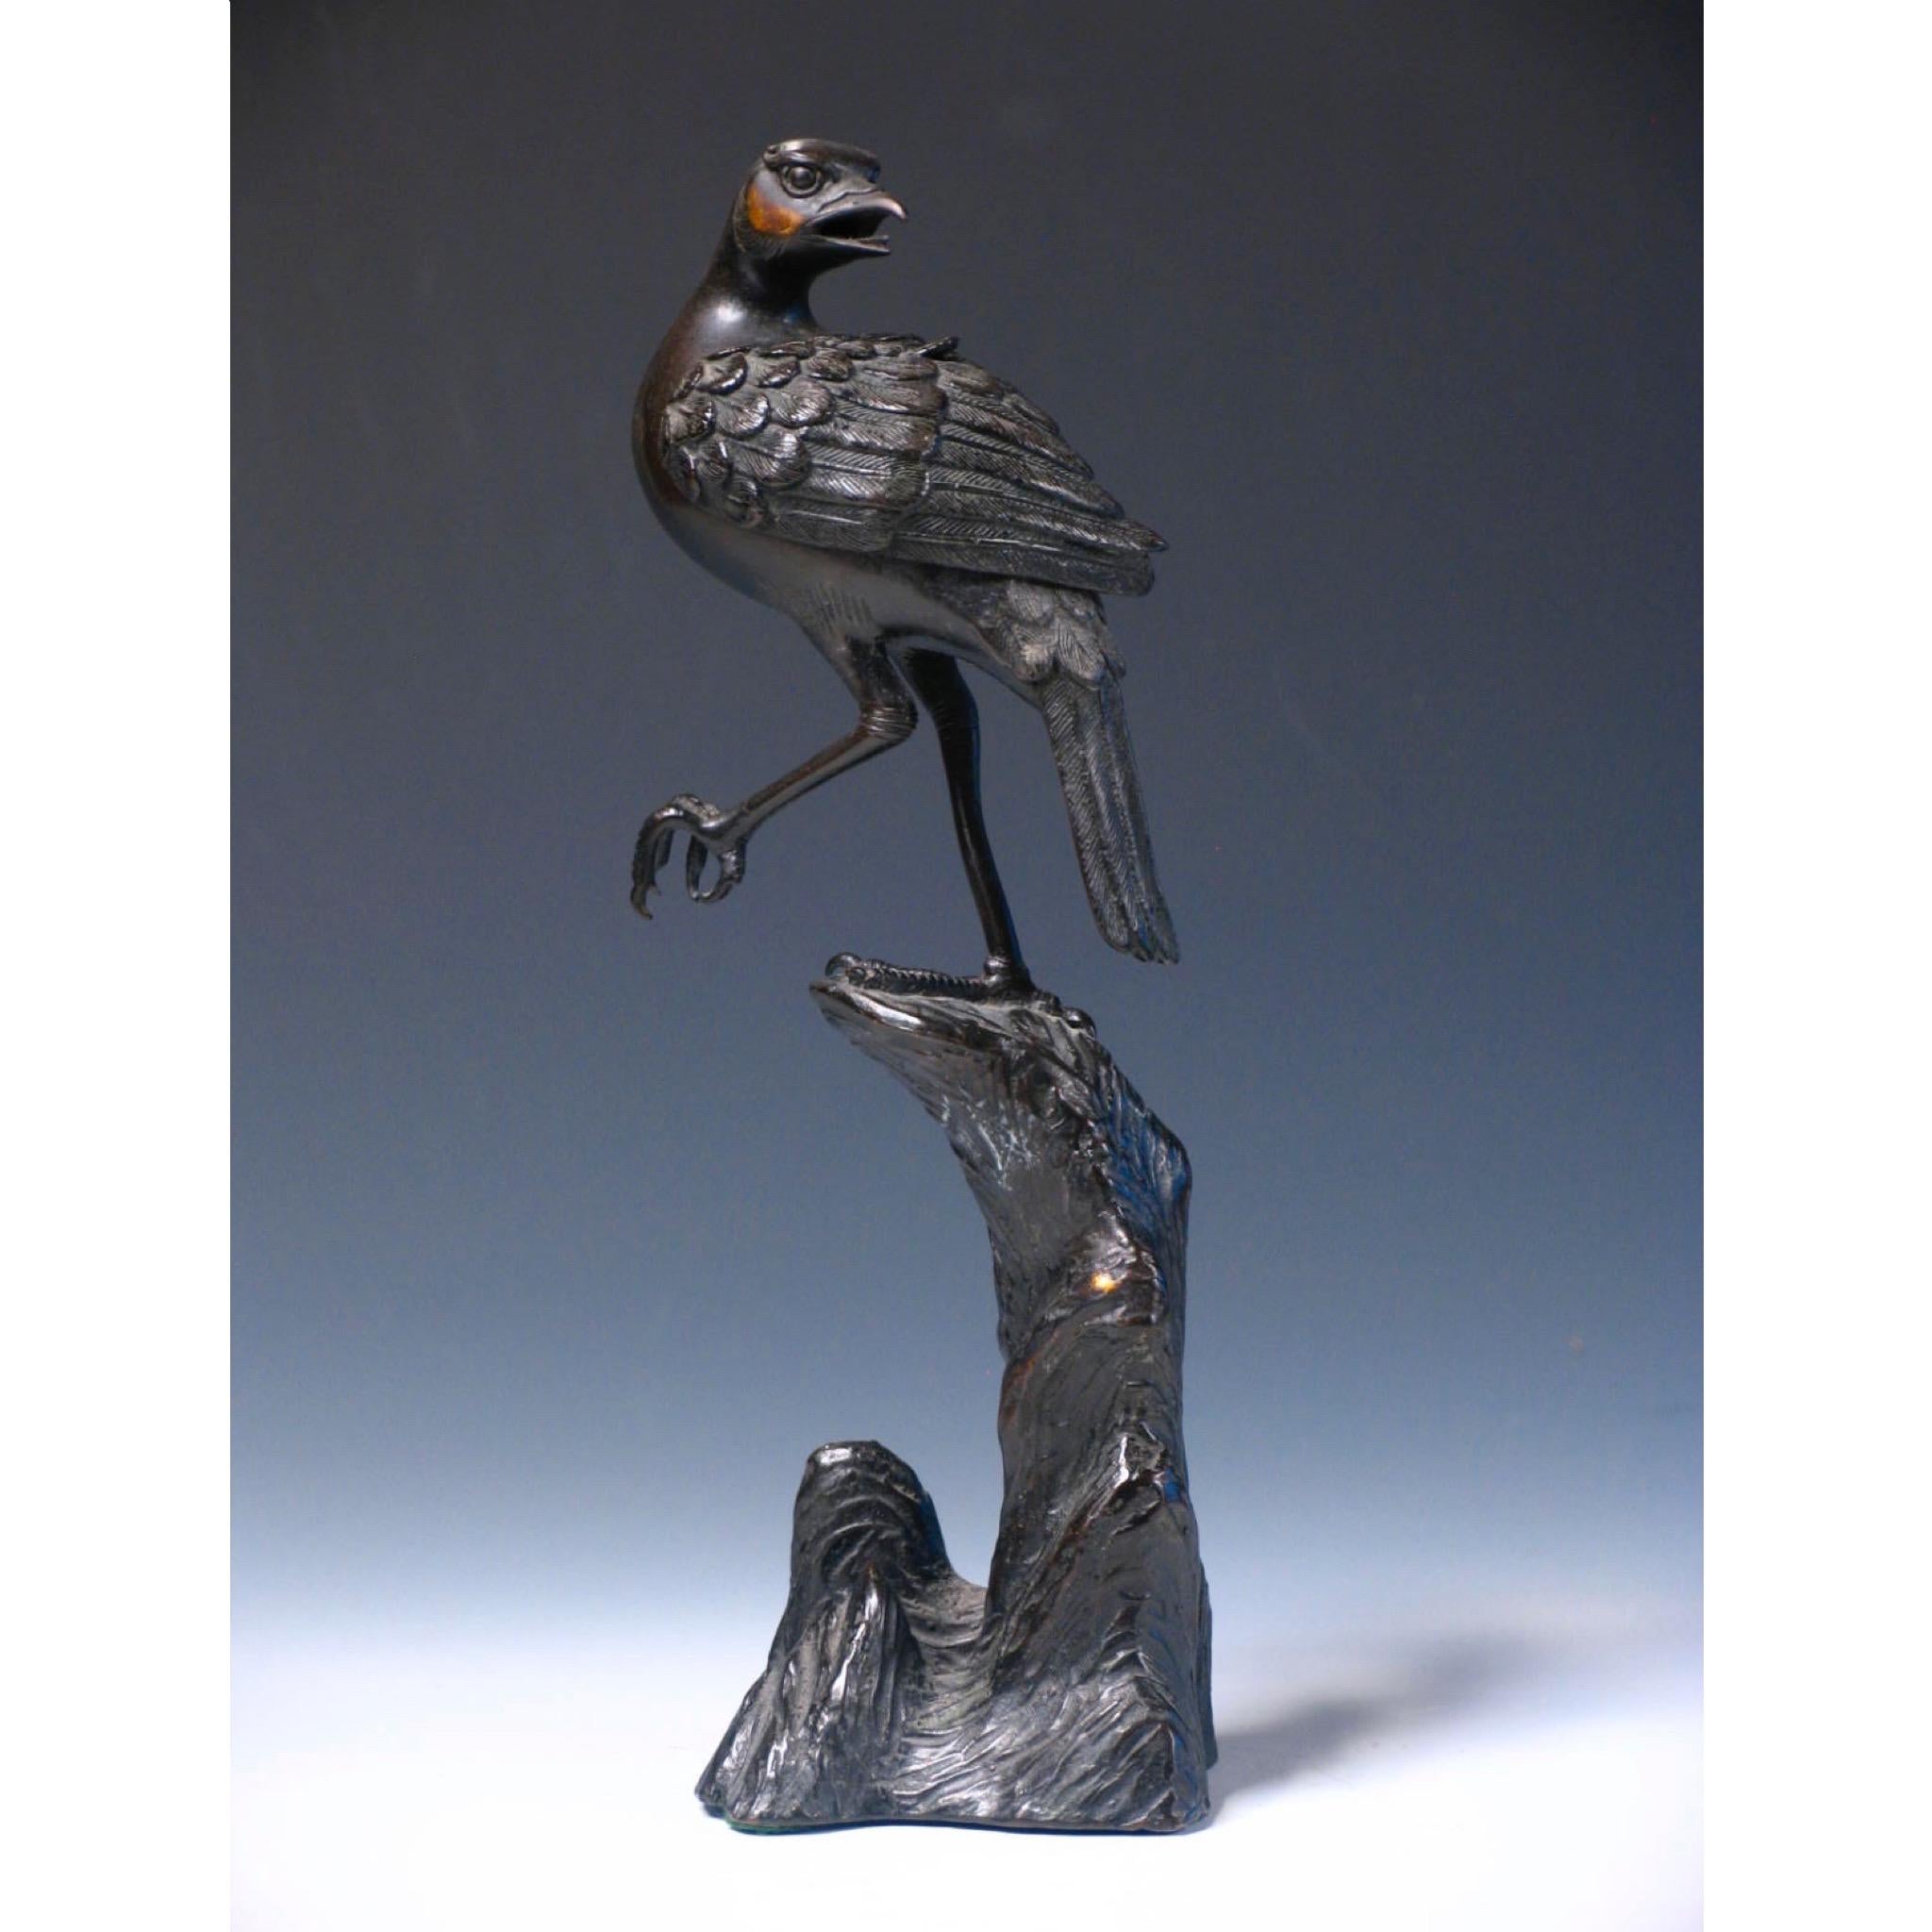 Antique Japanese bronze incense burner, in the form of a bird perched on one foot on a tall rocky outcropping, the bird’s head looking back with open mouth and pierced removable wings revealing the incense chamber, the left foot partially clenched,